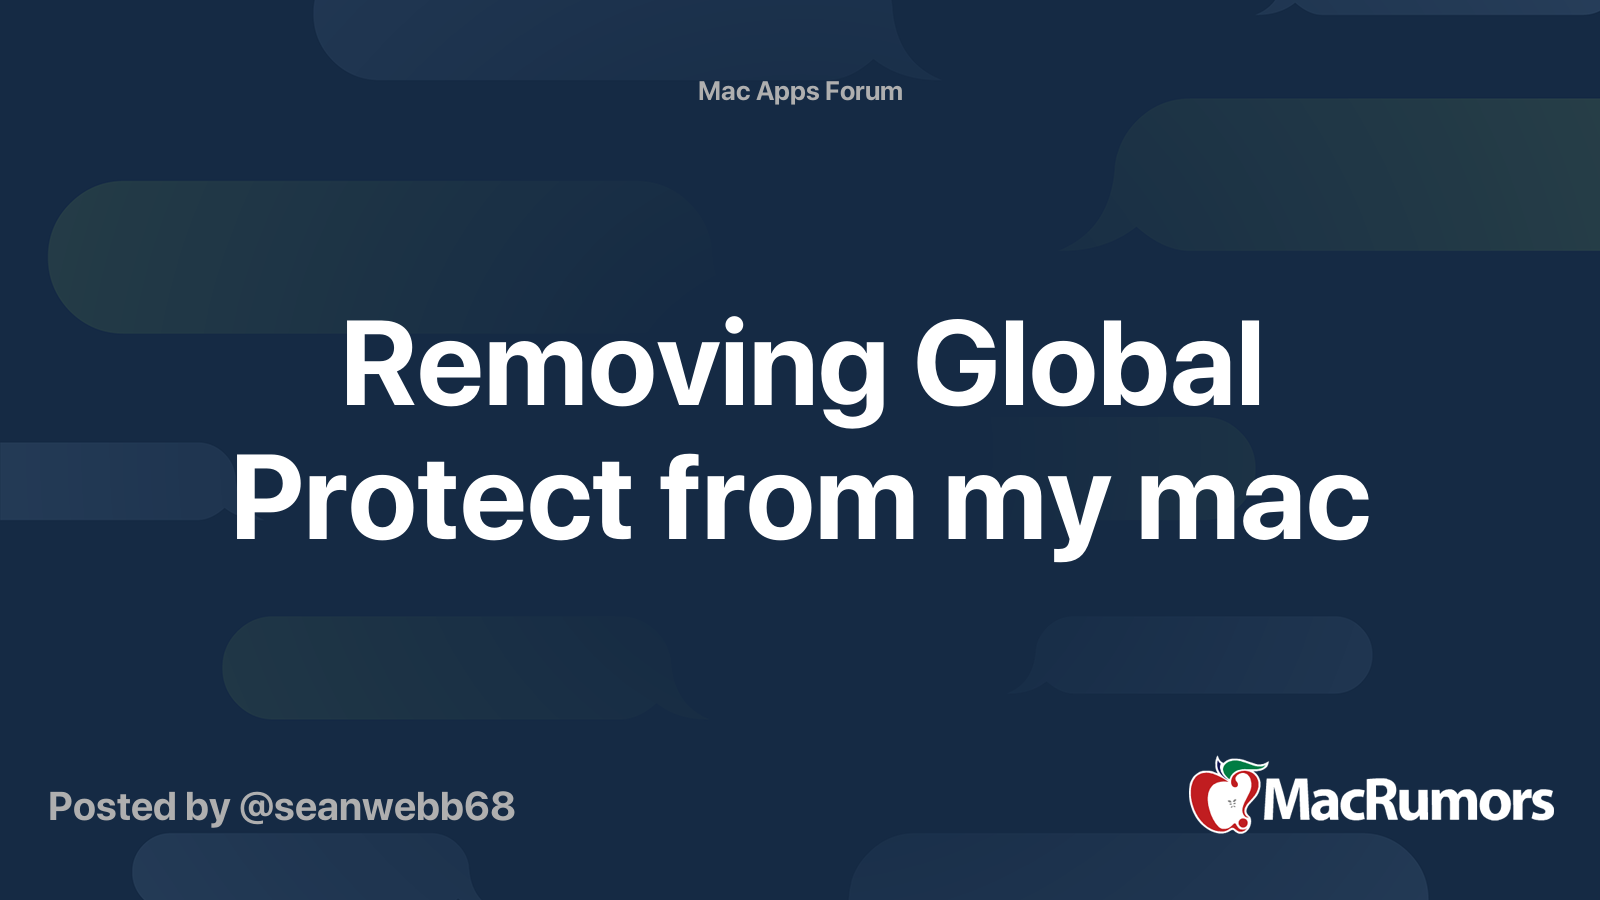 And install the globalprotect app for macbook pro